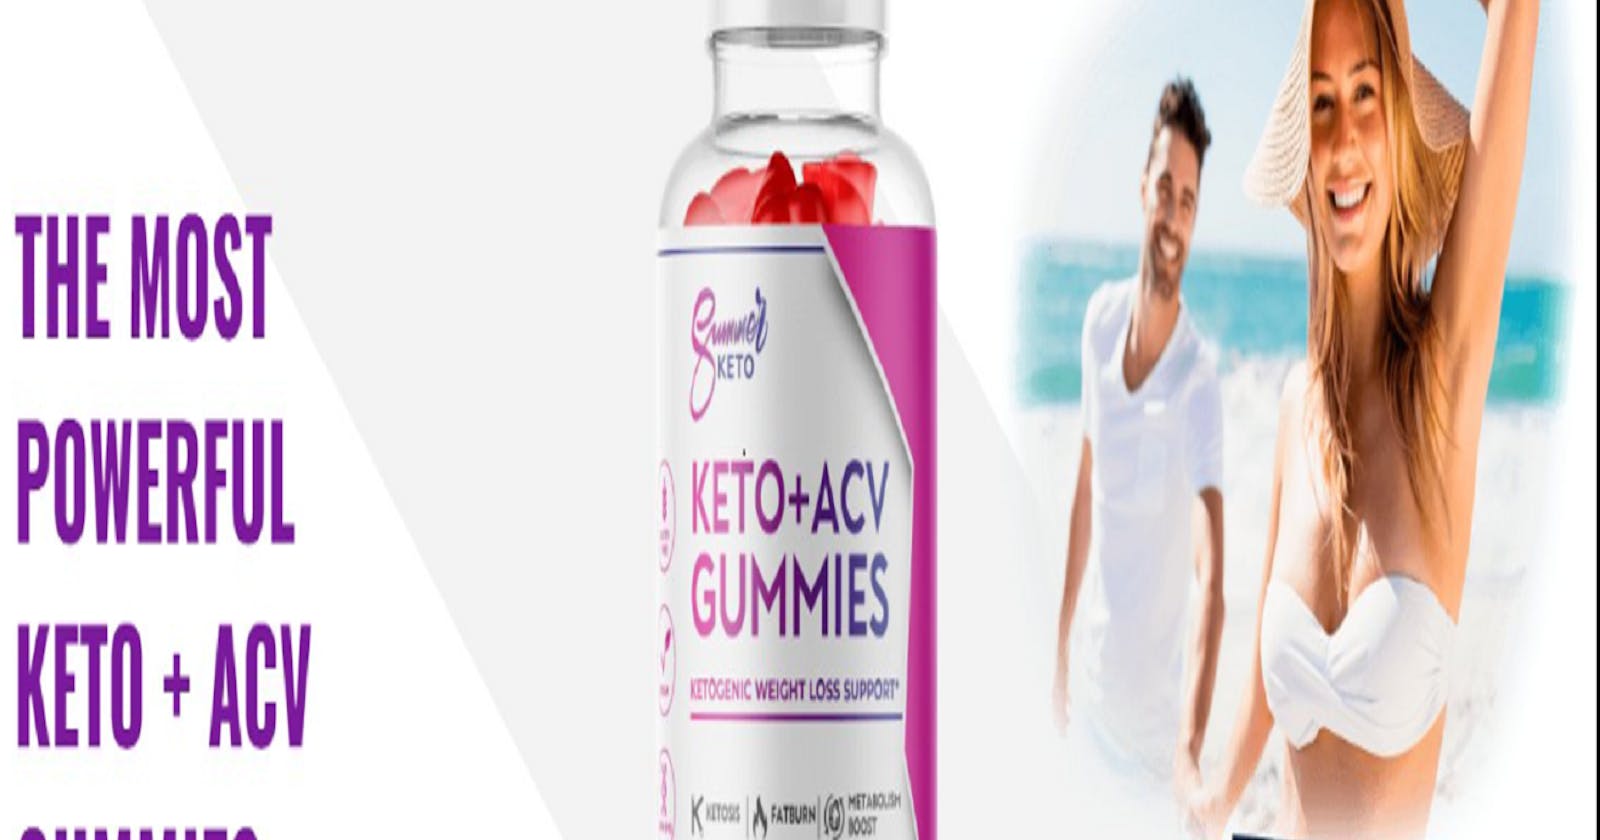 Summer Keto + ACV Gummies Reviews 100% Certified By Specialist!